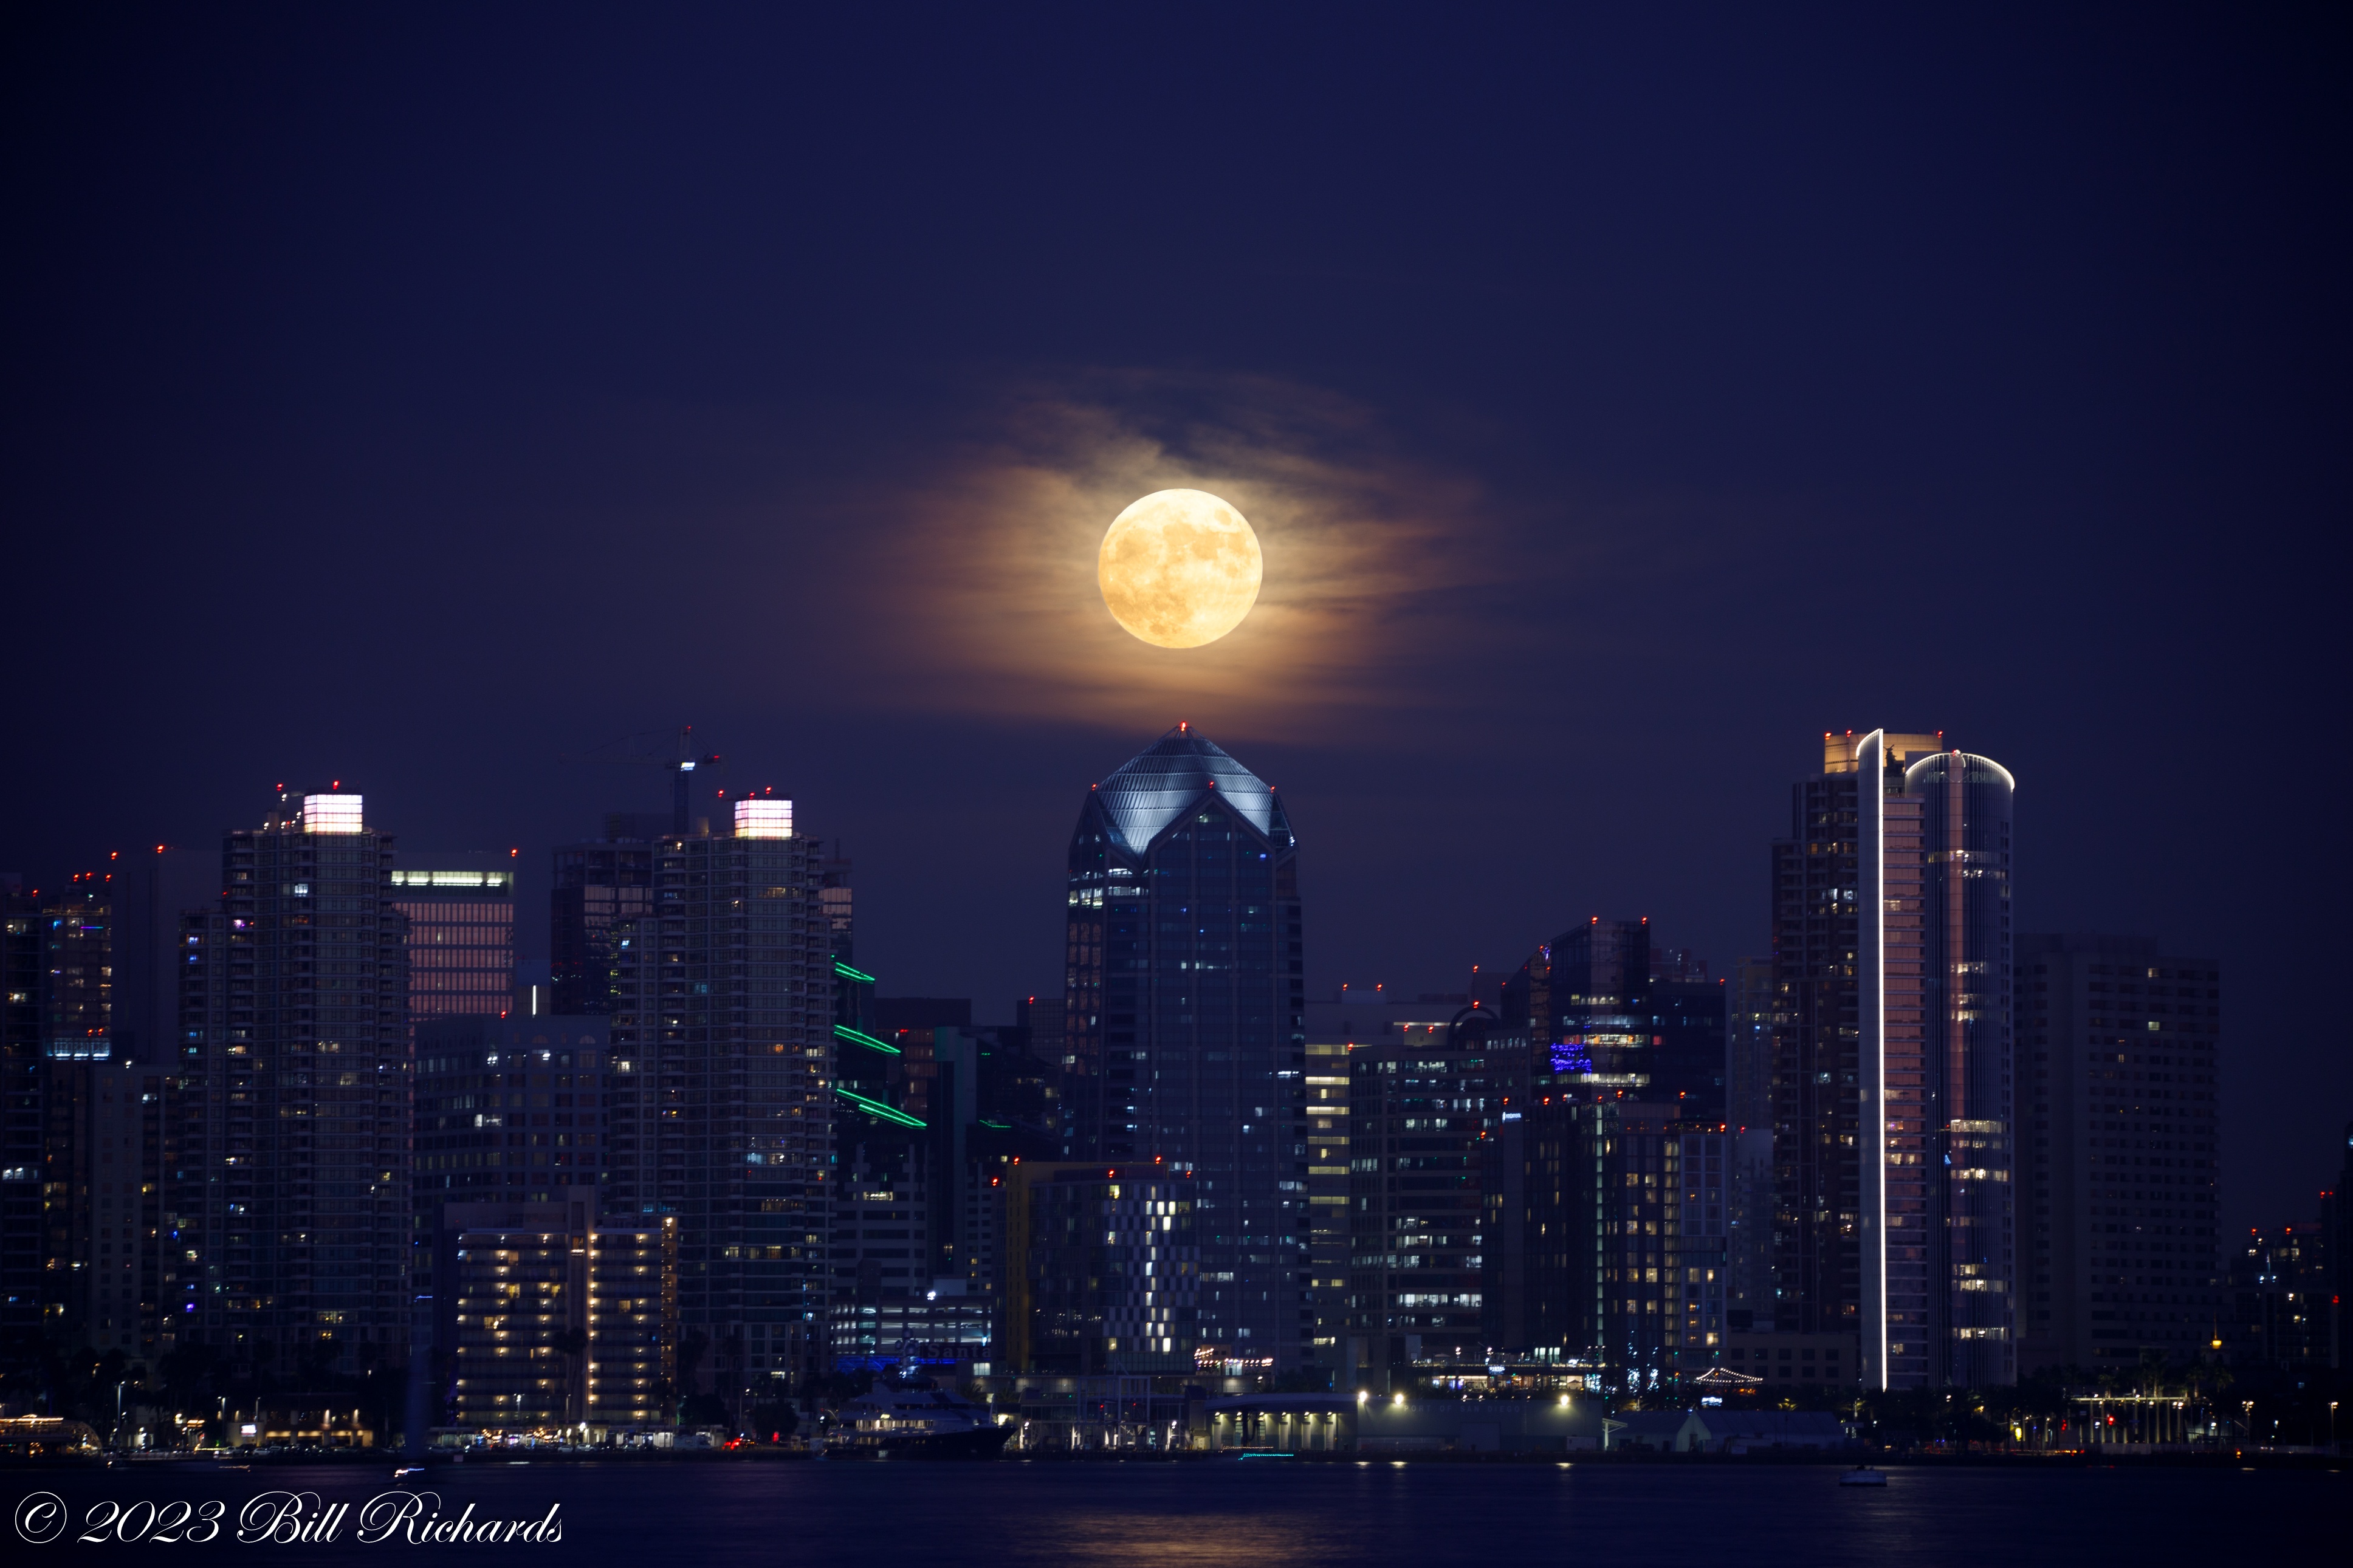 The San Diego skyline lights up under a bright supermoon in this image by Bill Richards.